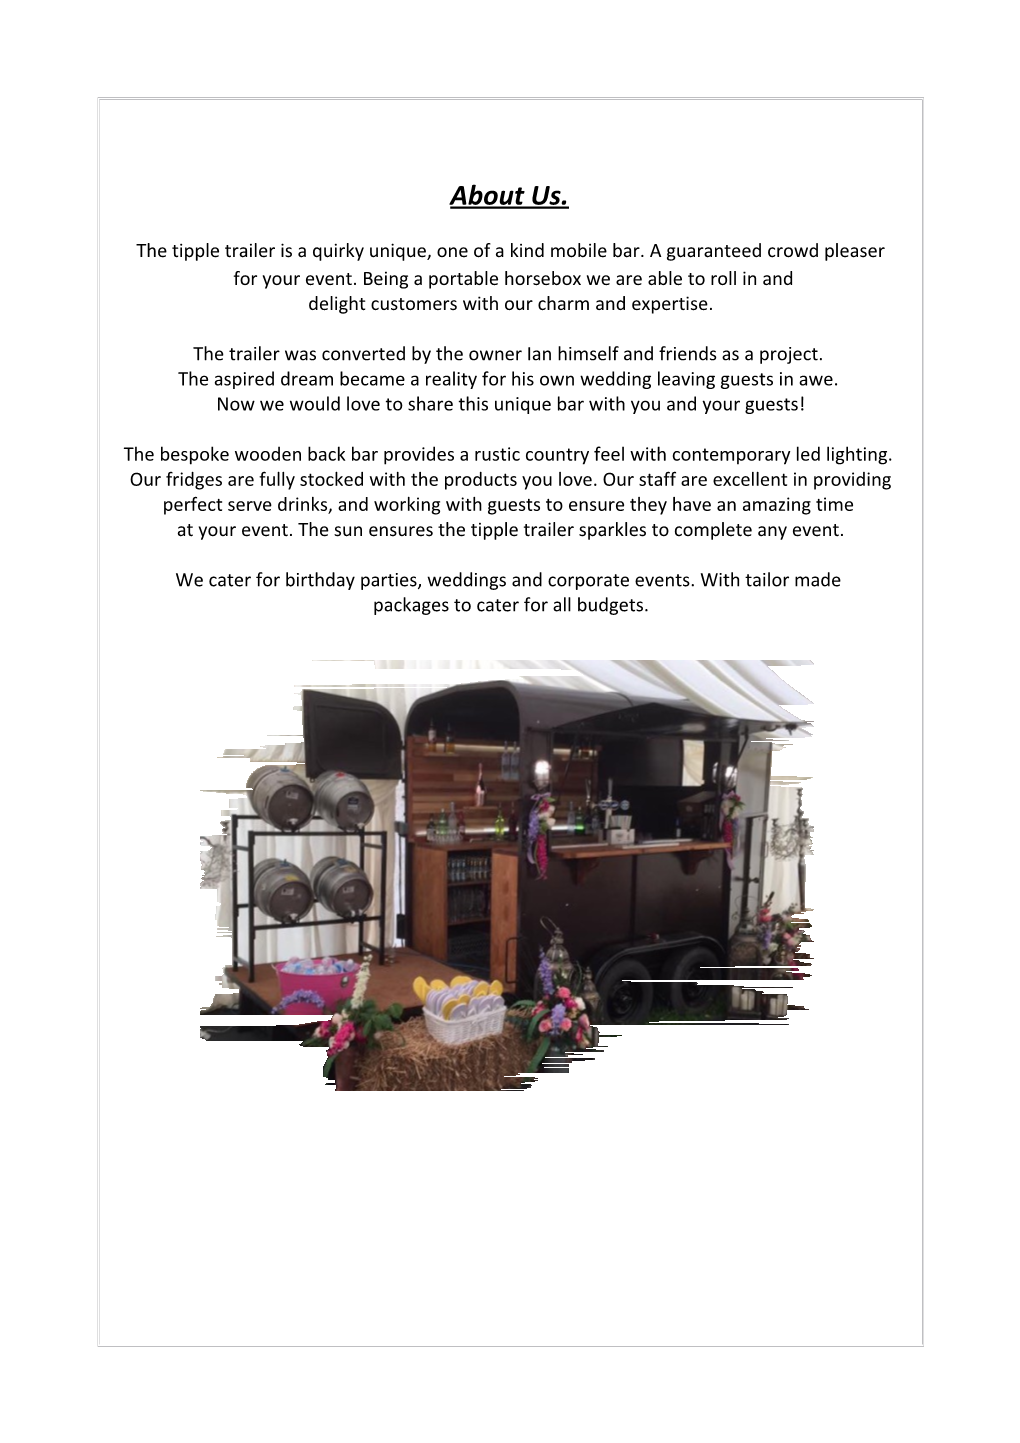 For Your Event. Being a Portable Horsebox We Are Able to Roll in And